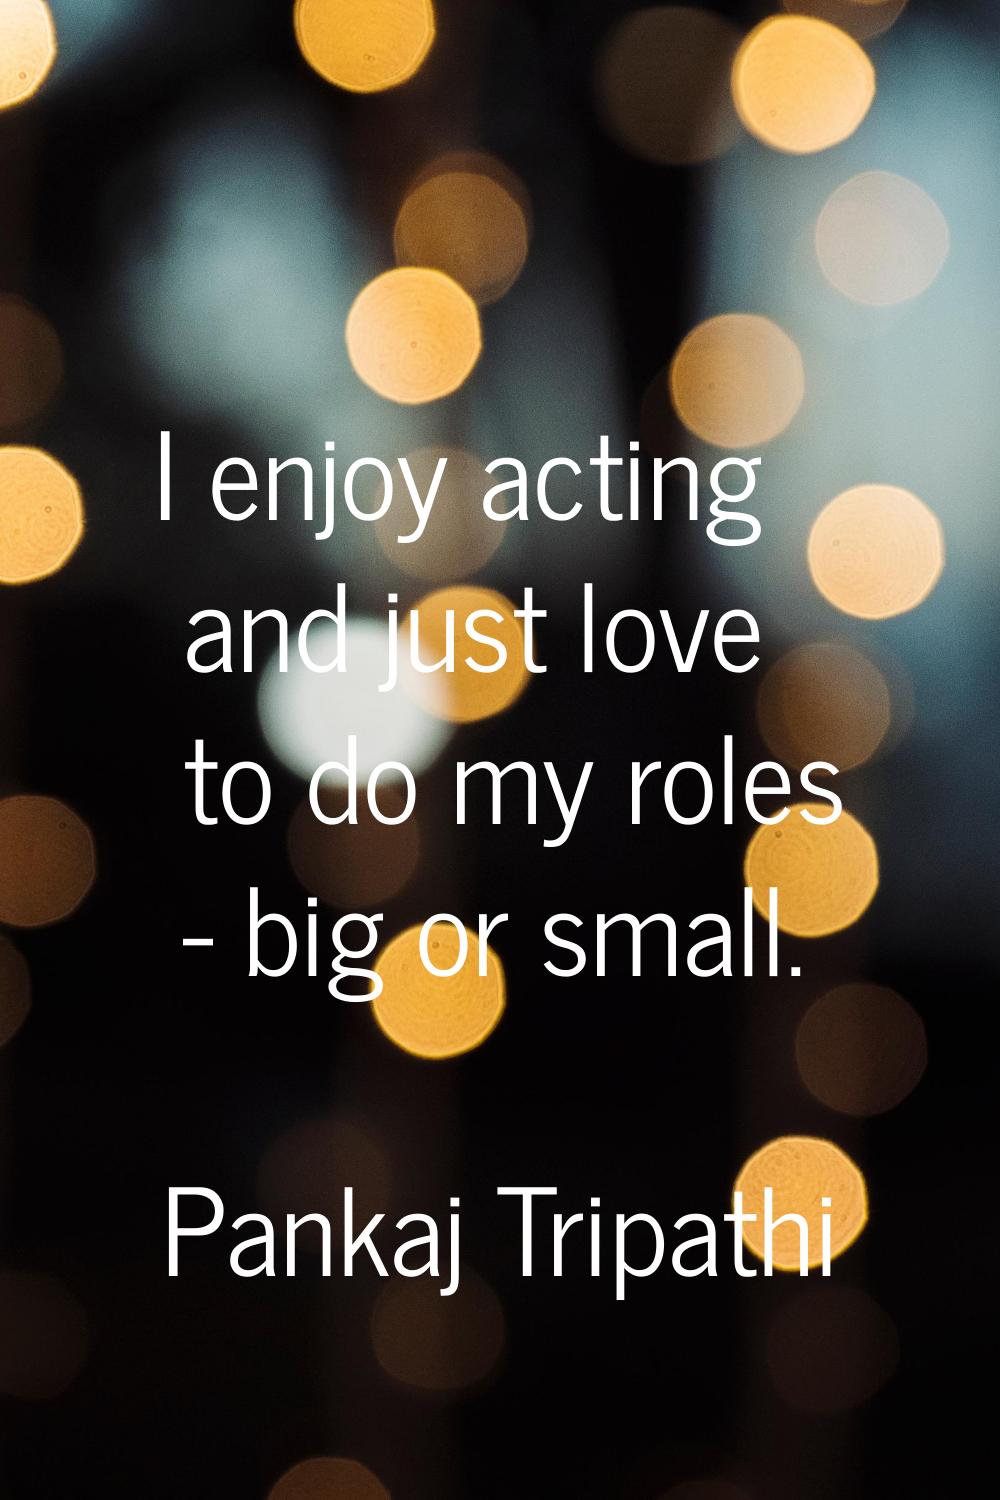 I enjoy acting and just love to do my roles - big or small.